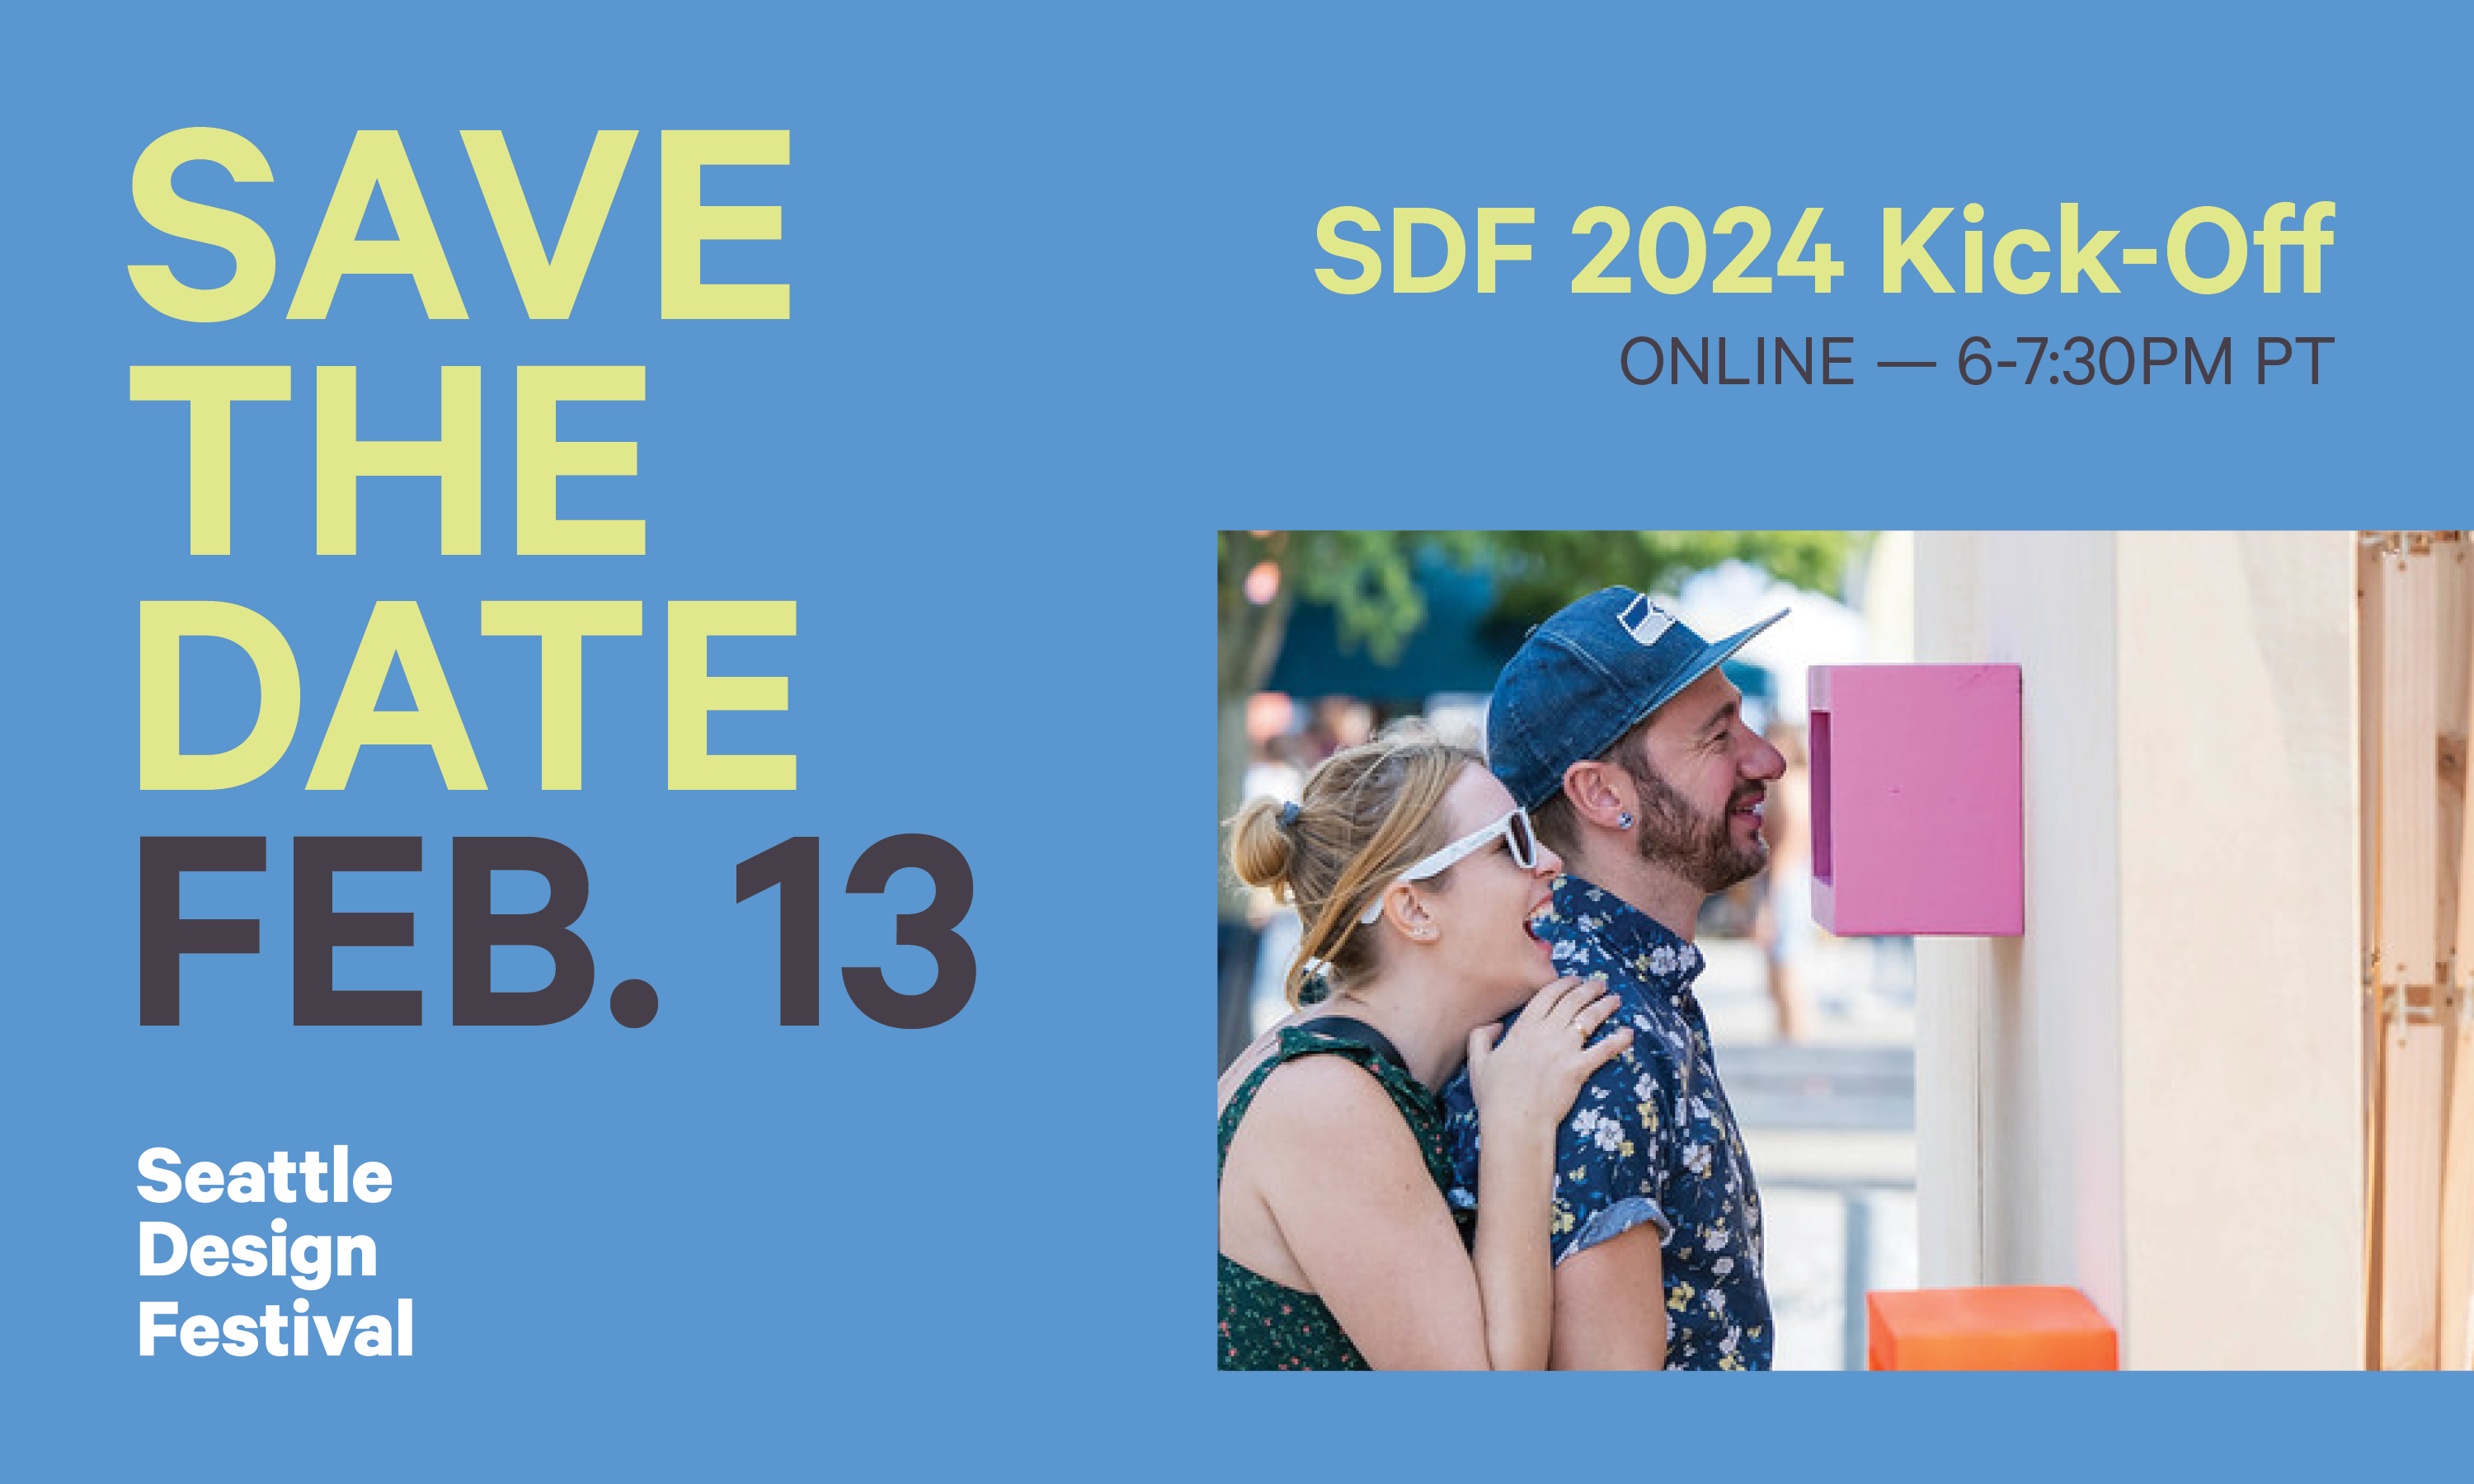 Save the Dates for The Festival Series 2024! - The Festival